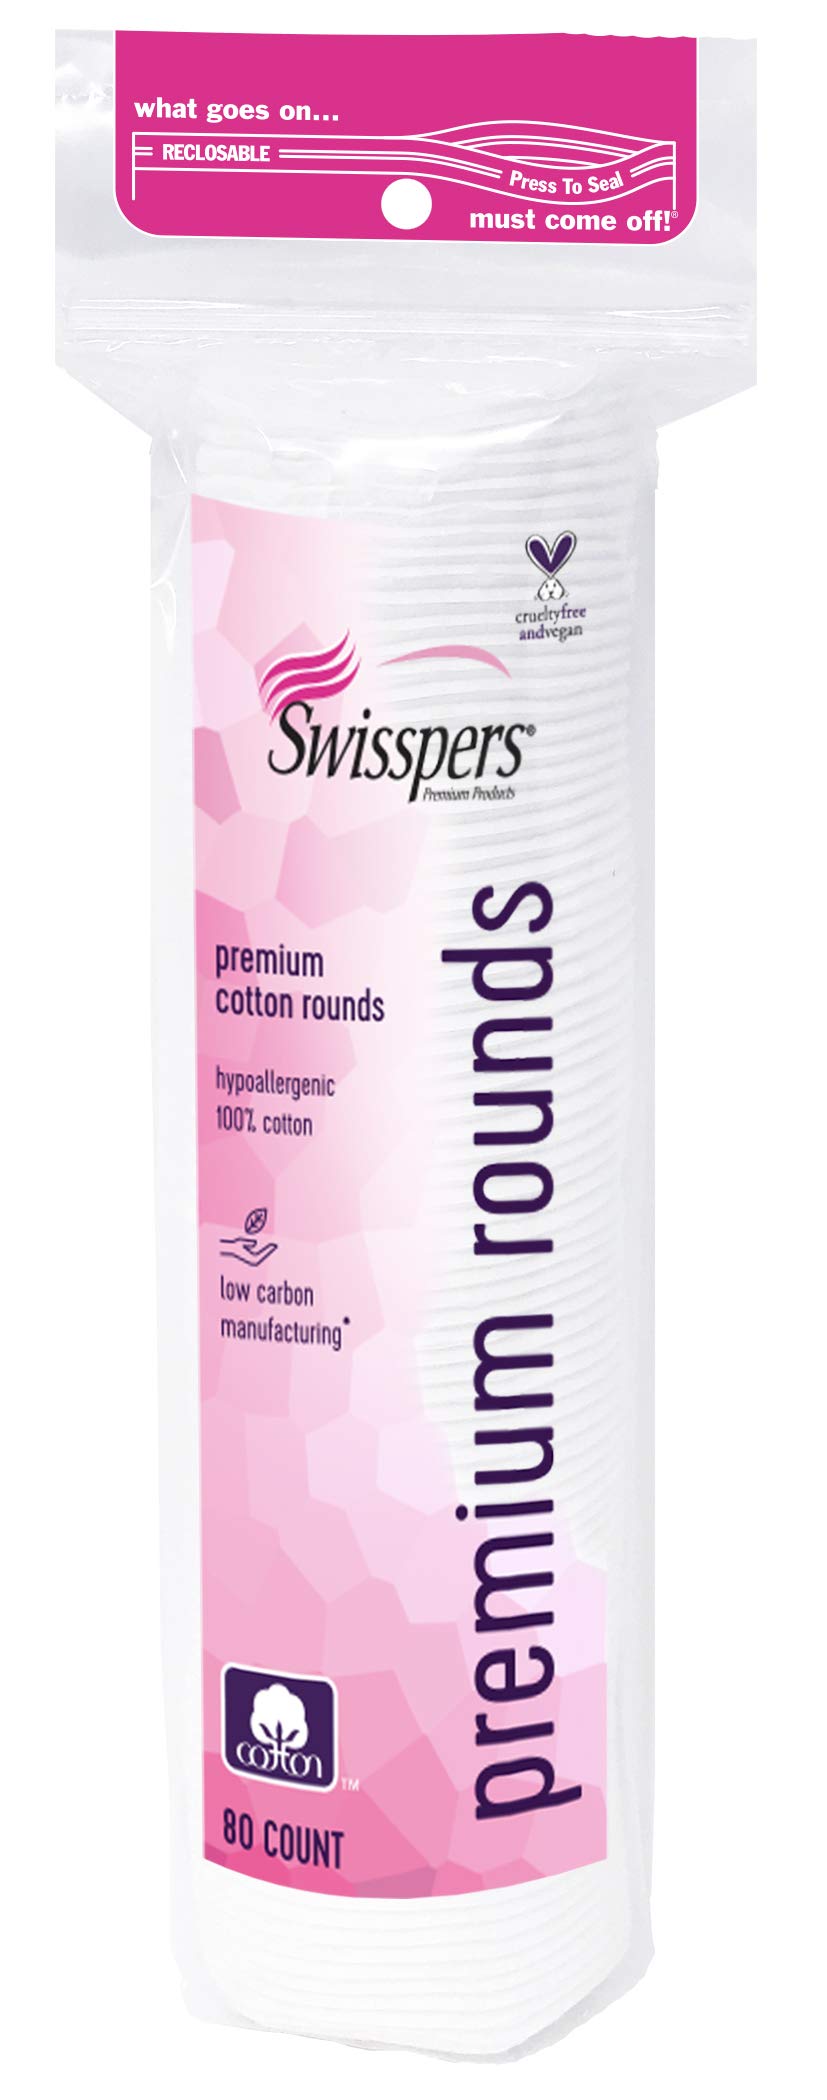 Swisspers Premium Cotton Rounds, Hypoallergenic, 80 Count, Pack of 6 (480 Rounds Total)